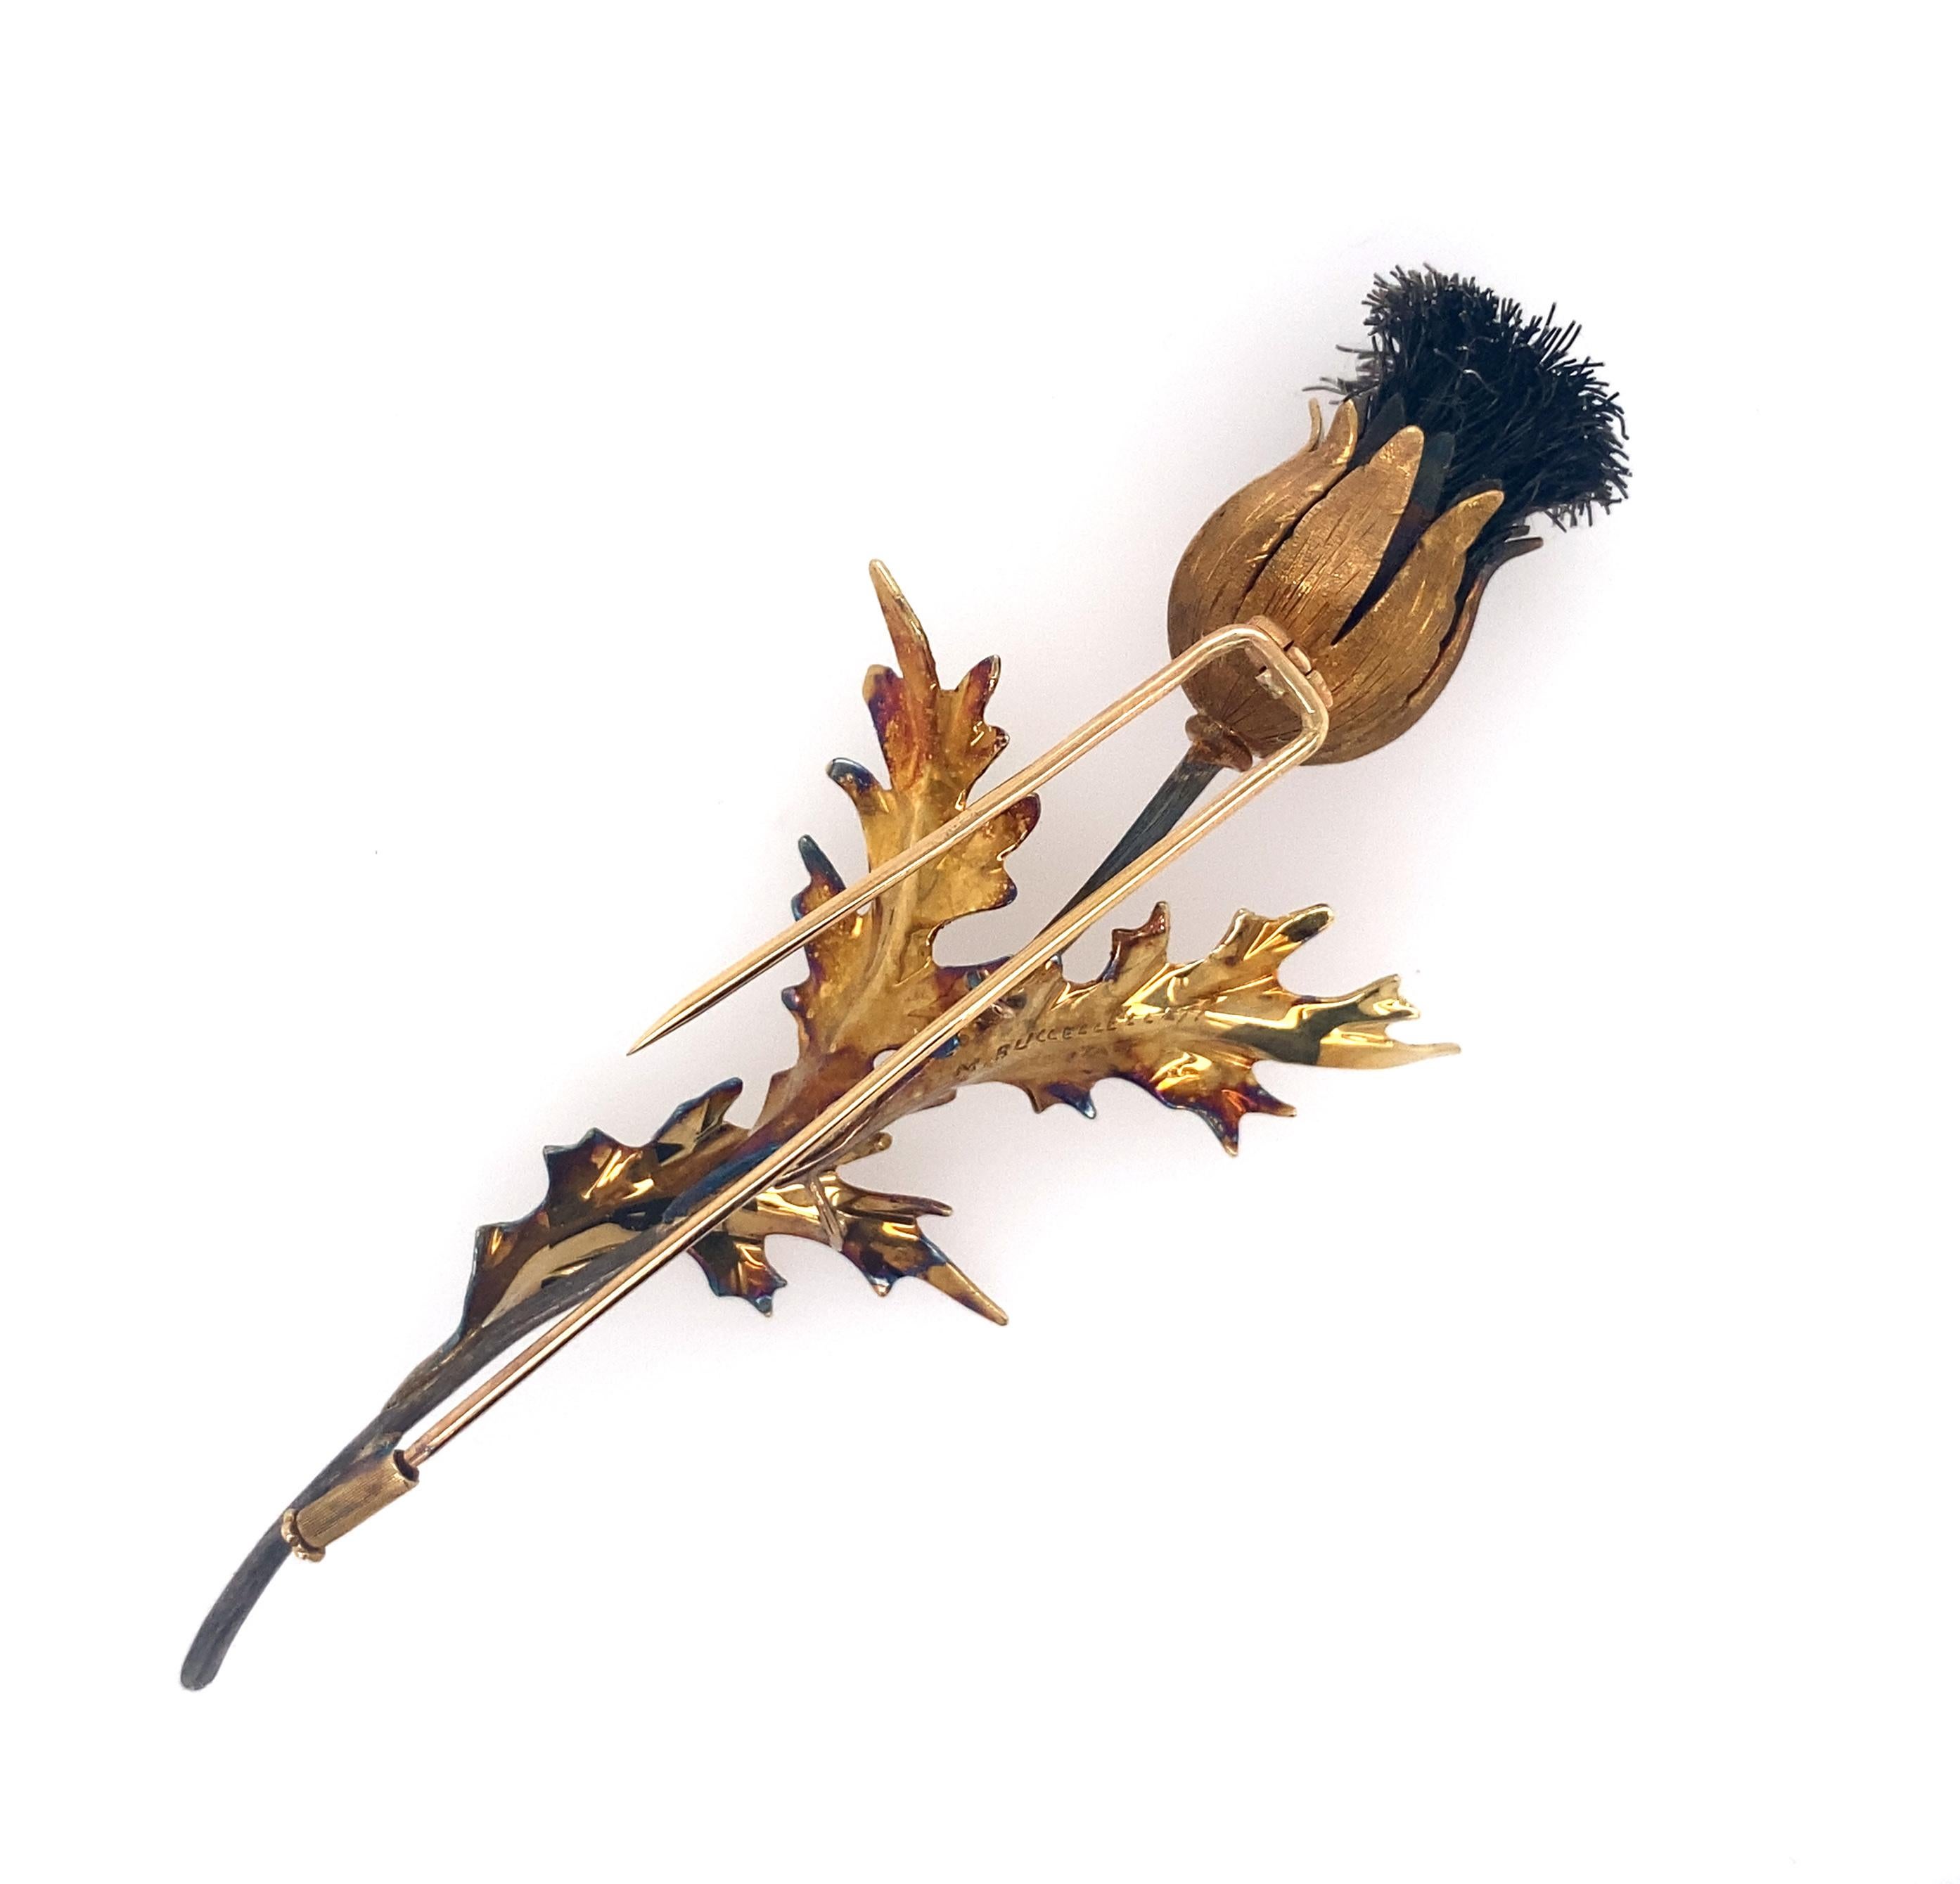 A vintage Mario Buccellati 18K yellow gold  thistle pin with leaves and a flowers. Italian, circa 1980. Approx. 10 cm long, weight 15.4 dwt. Signed M. Buccellati Italy with box.